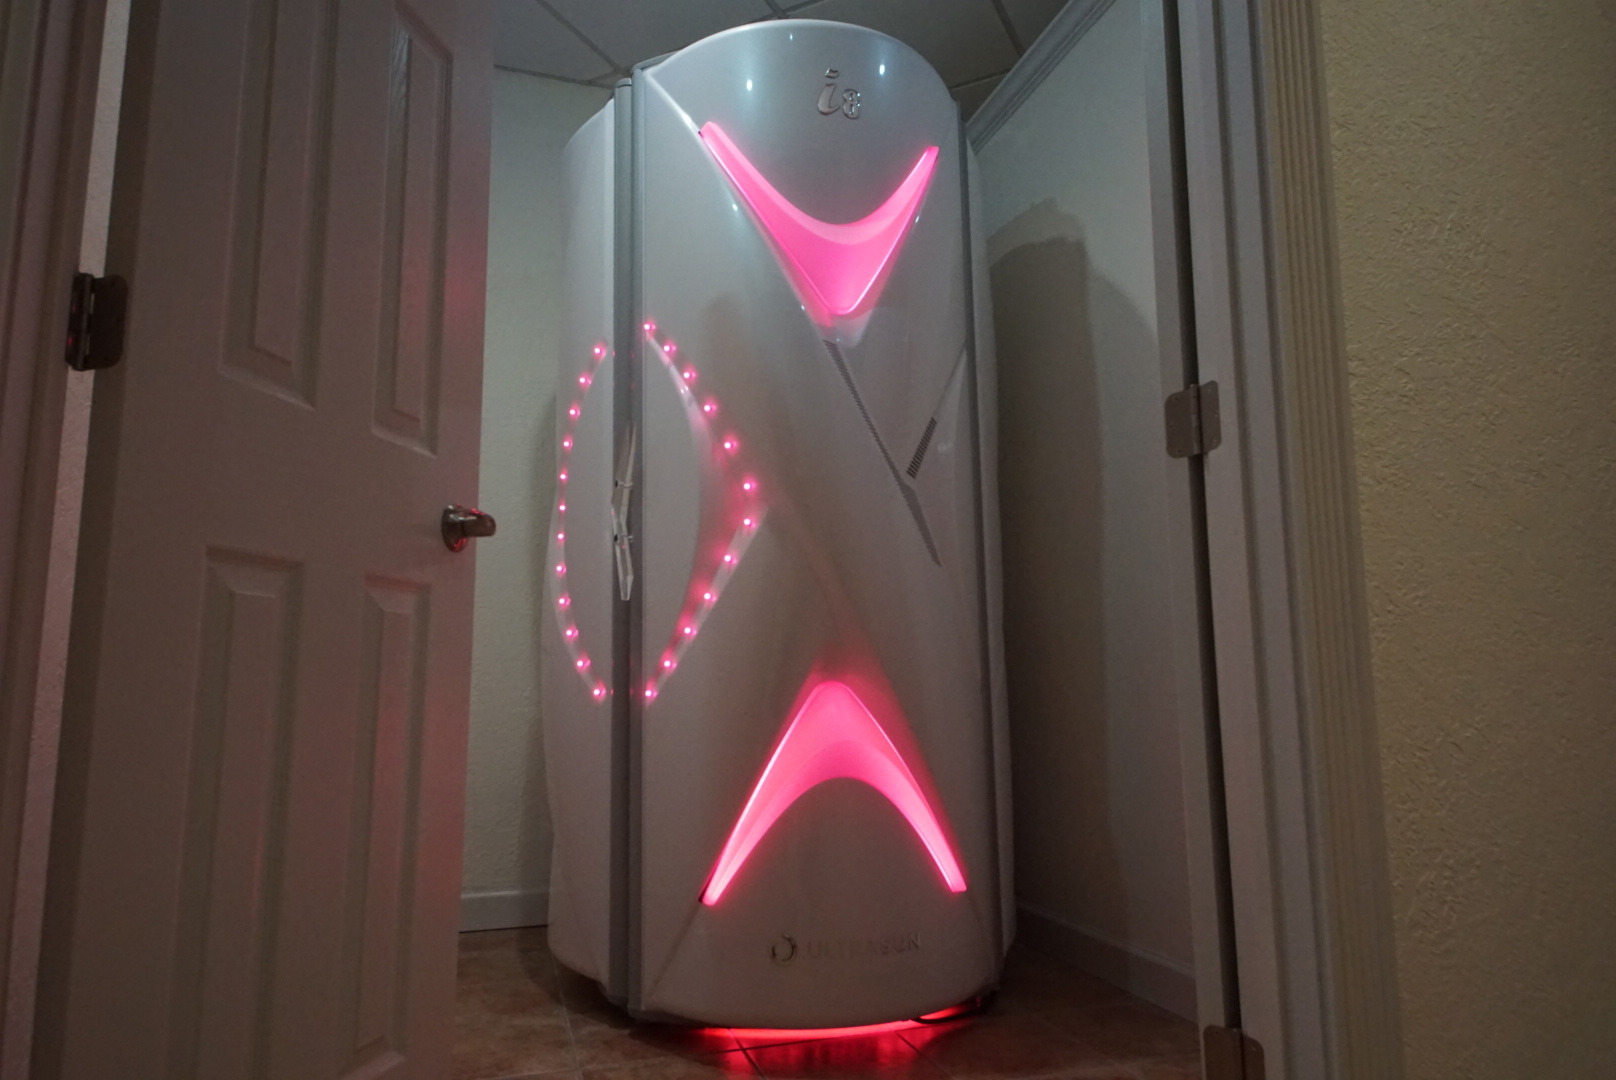 A white and red light up machine in the corner of room.